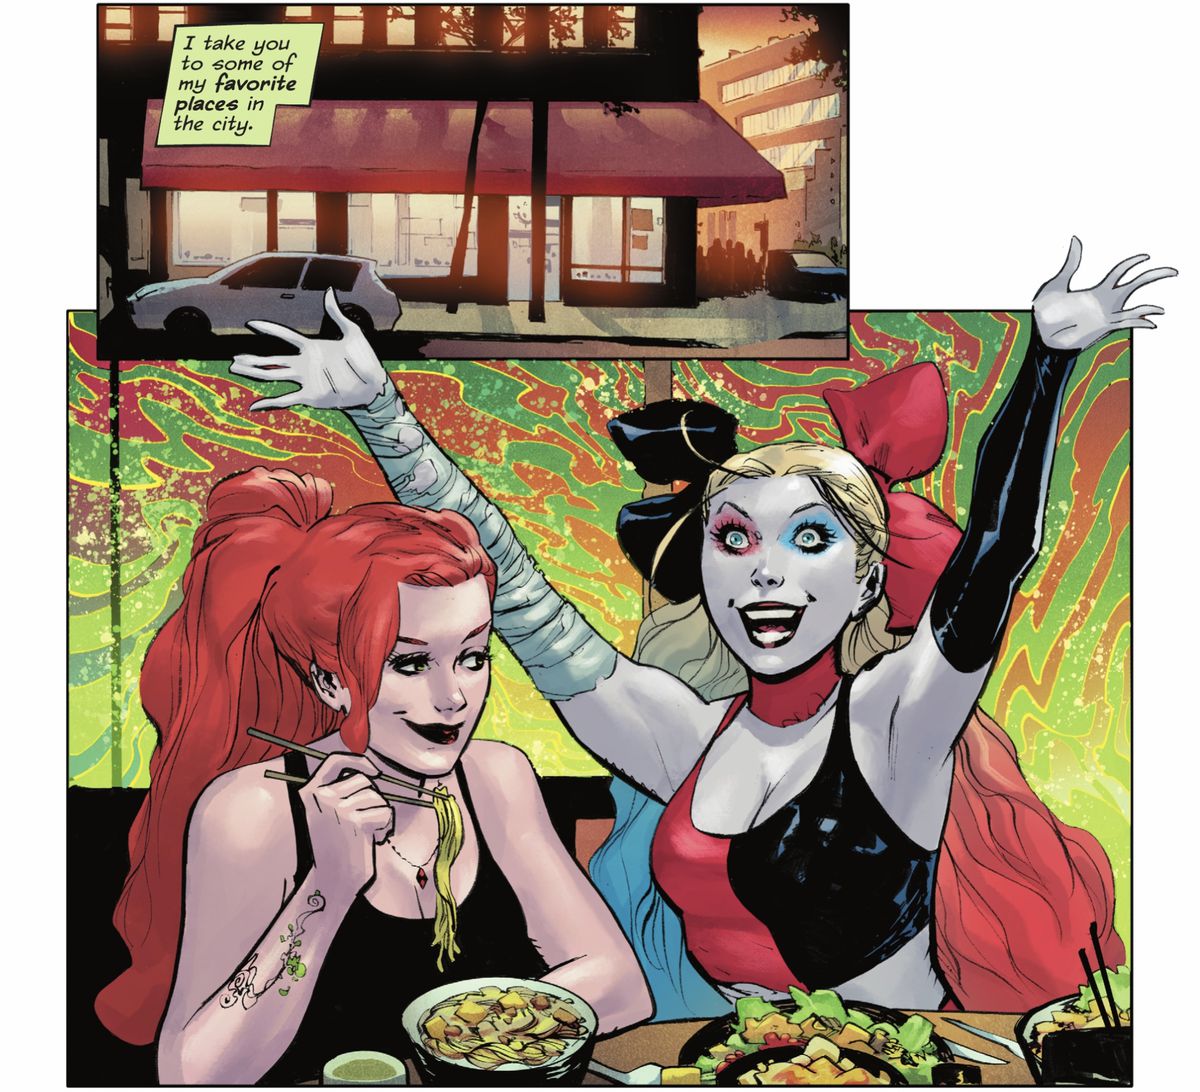 “I take you to some of my favorite places in the city,” thinks Poison Ivy as she and Harley Quinn eat noodles at a restaurant. Harley is delighted by all the hallucinogenic multicolored swirls around her in Poison Ivy #9 (2023).